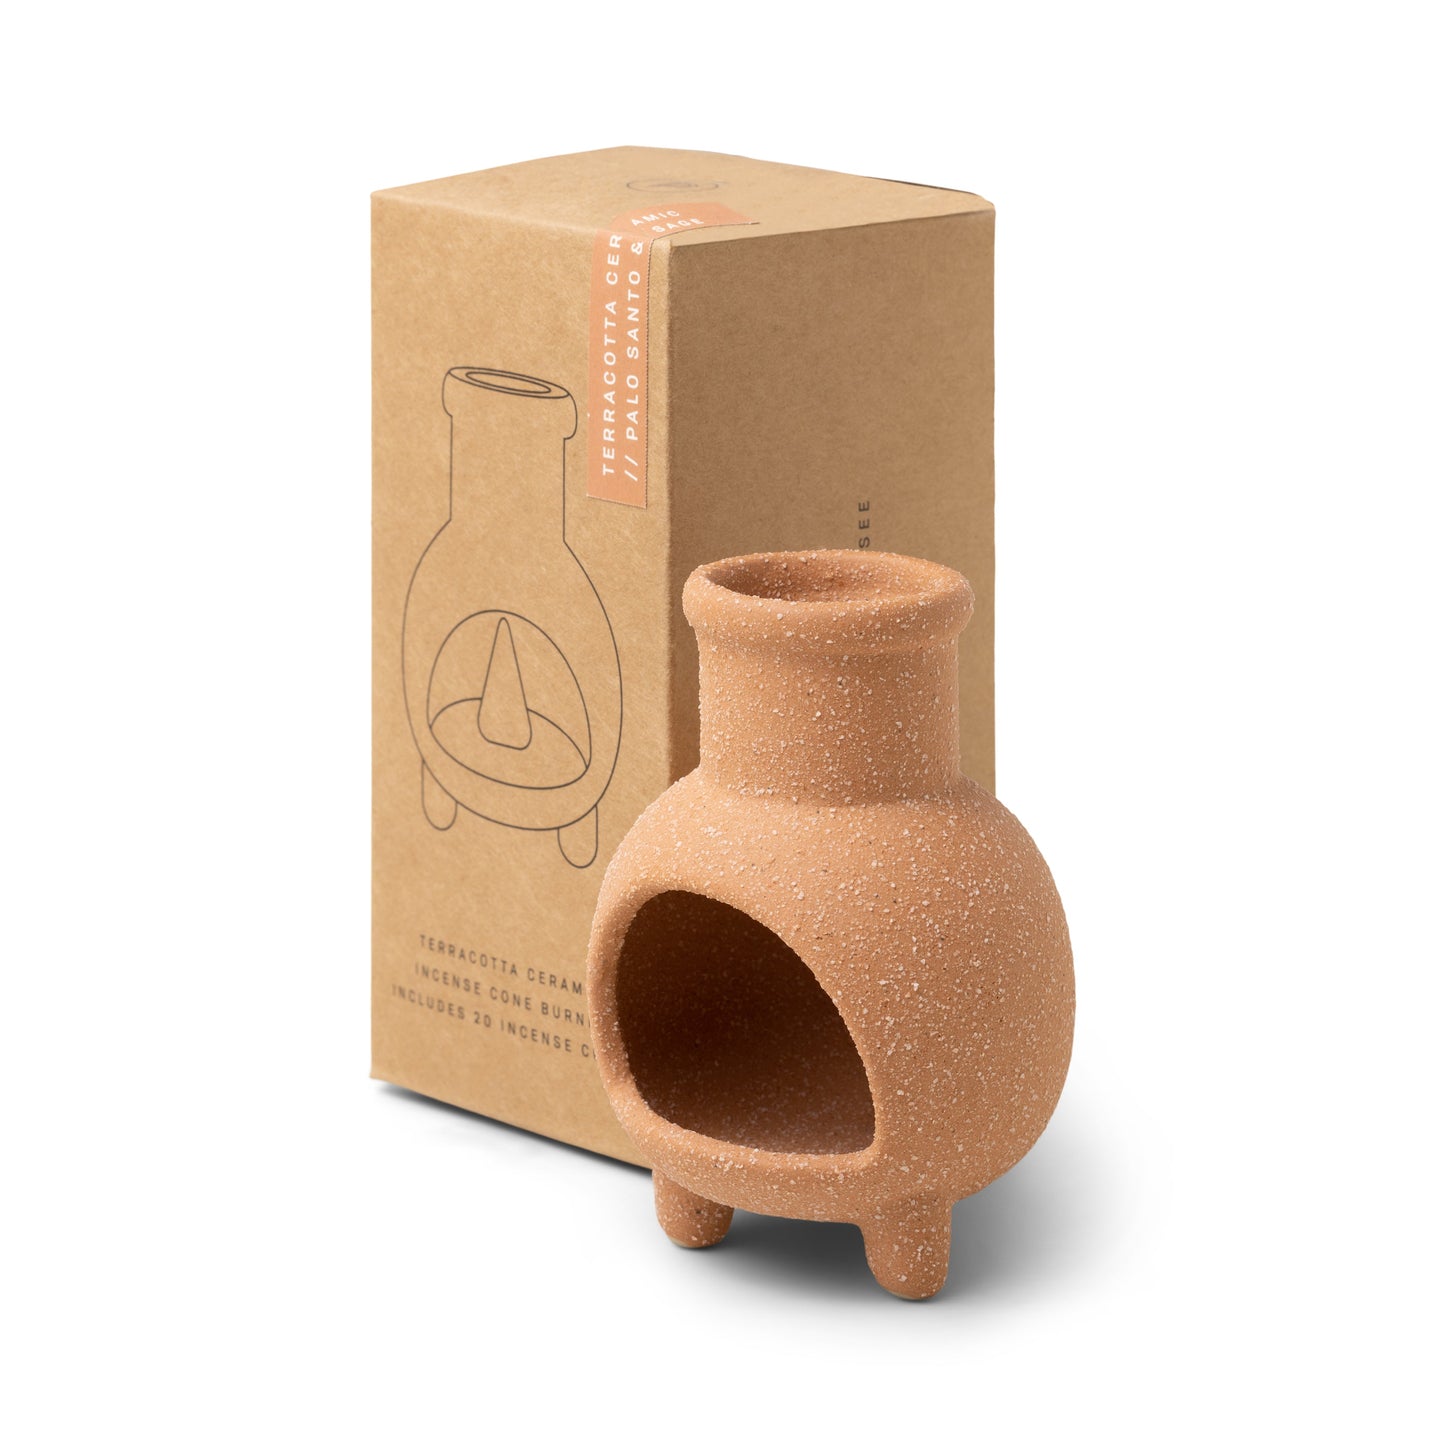 Ceramic Chimnea Incense Cone Holder and box side by side